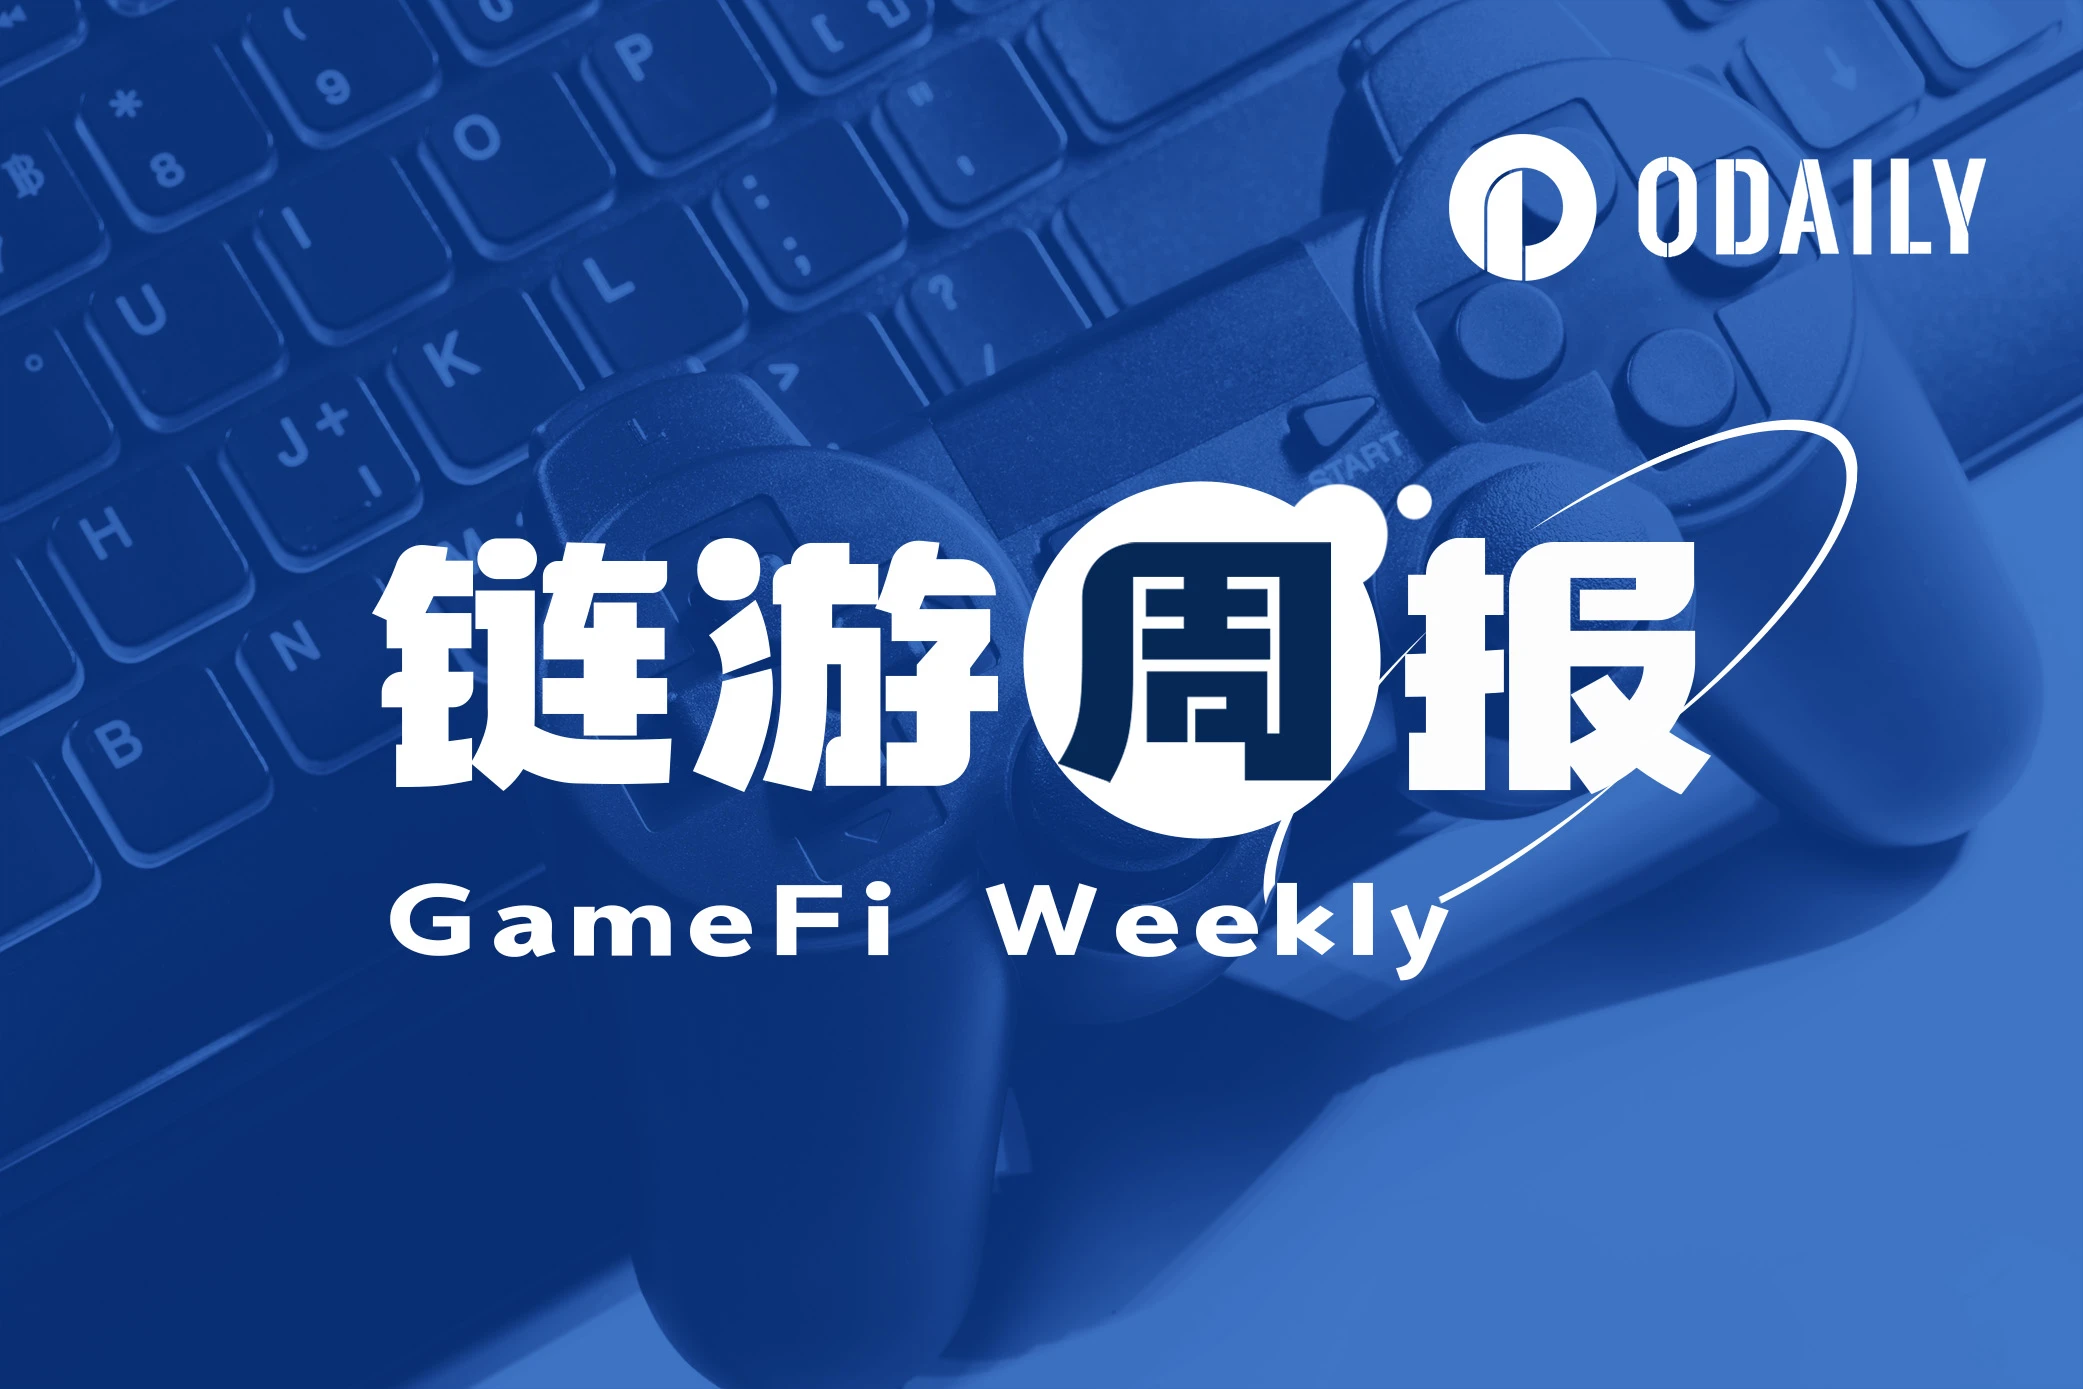 Chain Games Weekly Report - GALA’s new game will be launched soon; GMT rose 32.8% on the 7th (11.20~11.26)